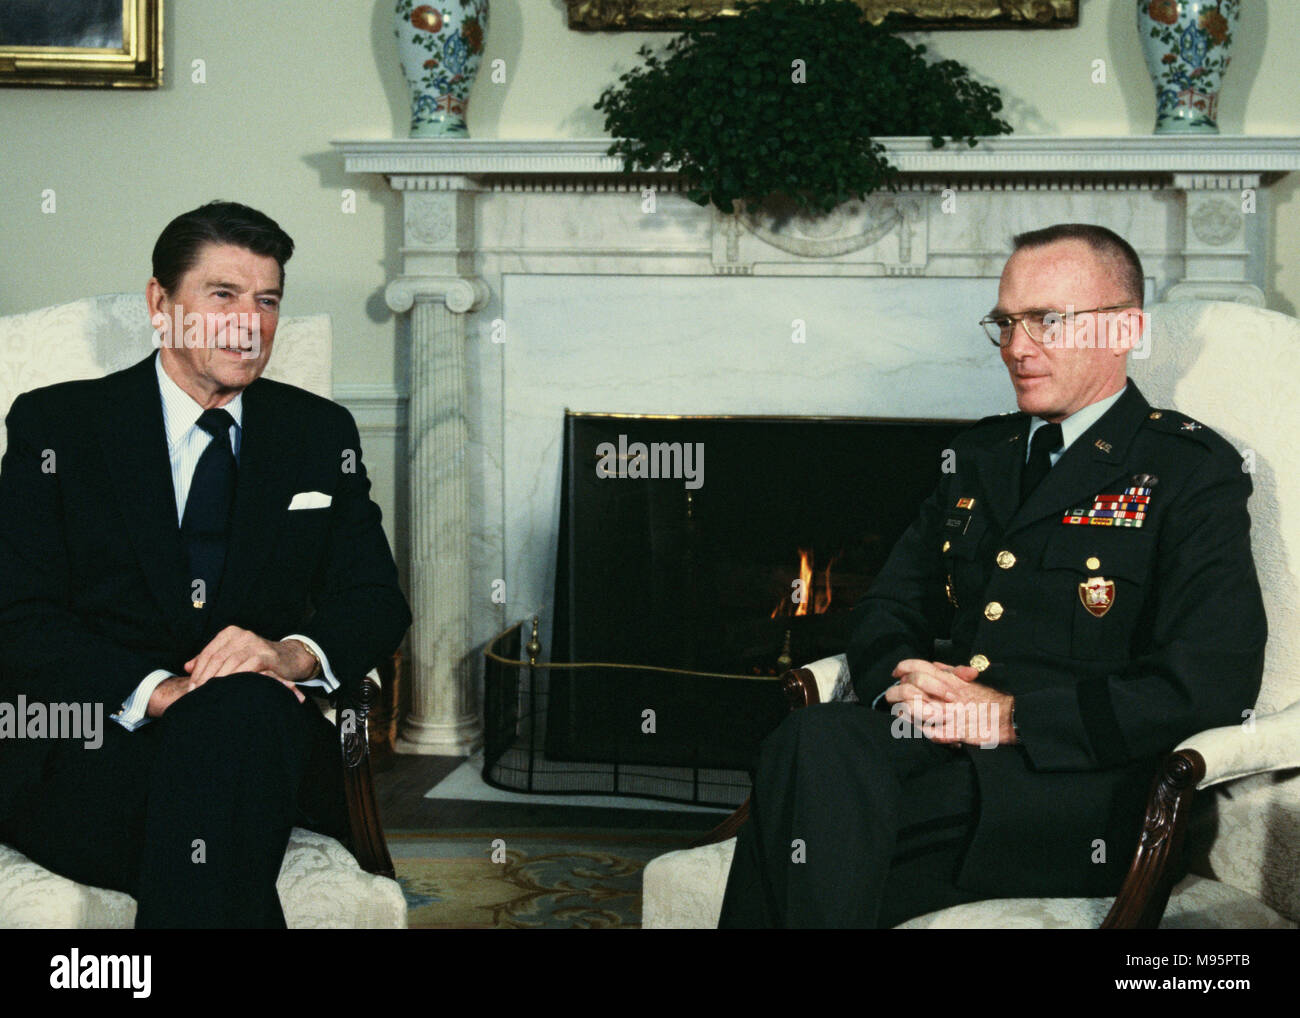 President Ronald Reagan and  Gen. James L. Dozier, who had been held captive for 42 days by Red Brigades terrorists on February 4, 1982.  Photograph by Dennis Brack Stock Photo